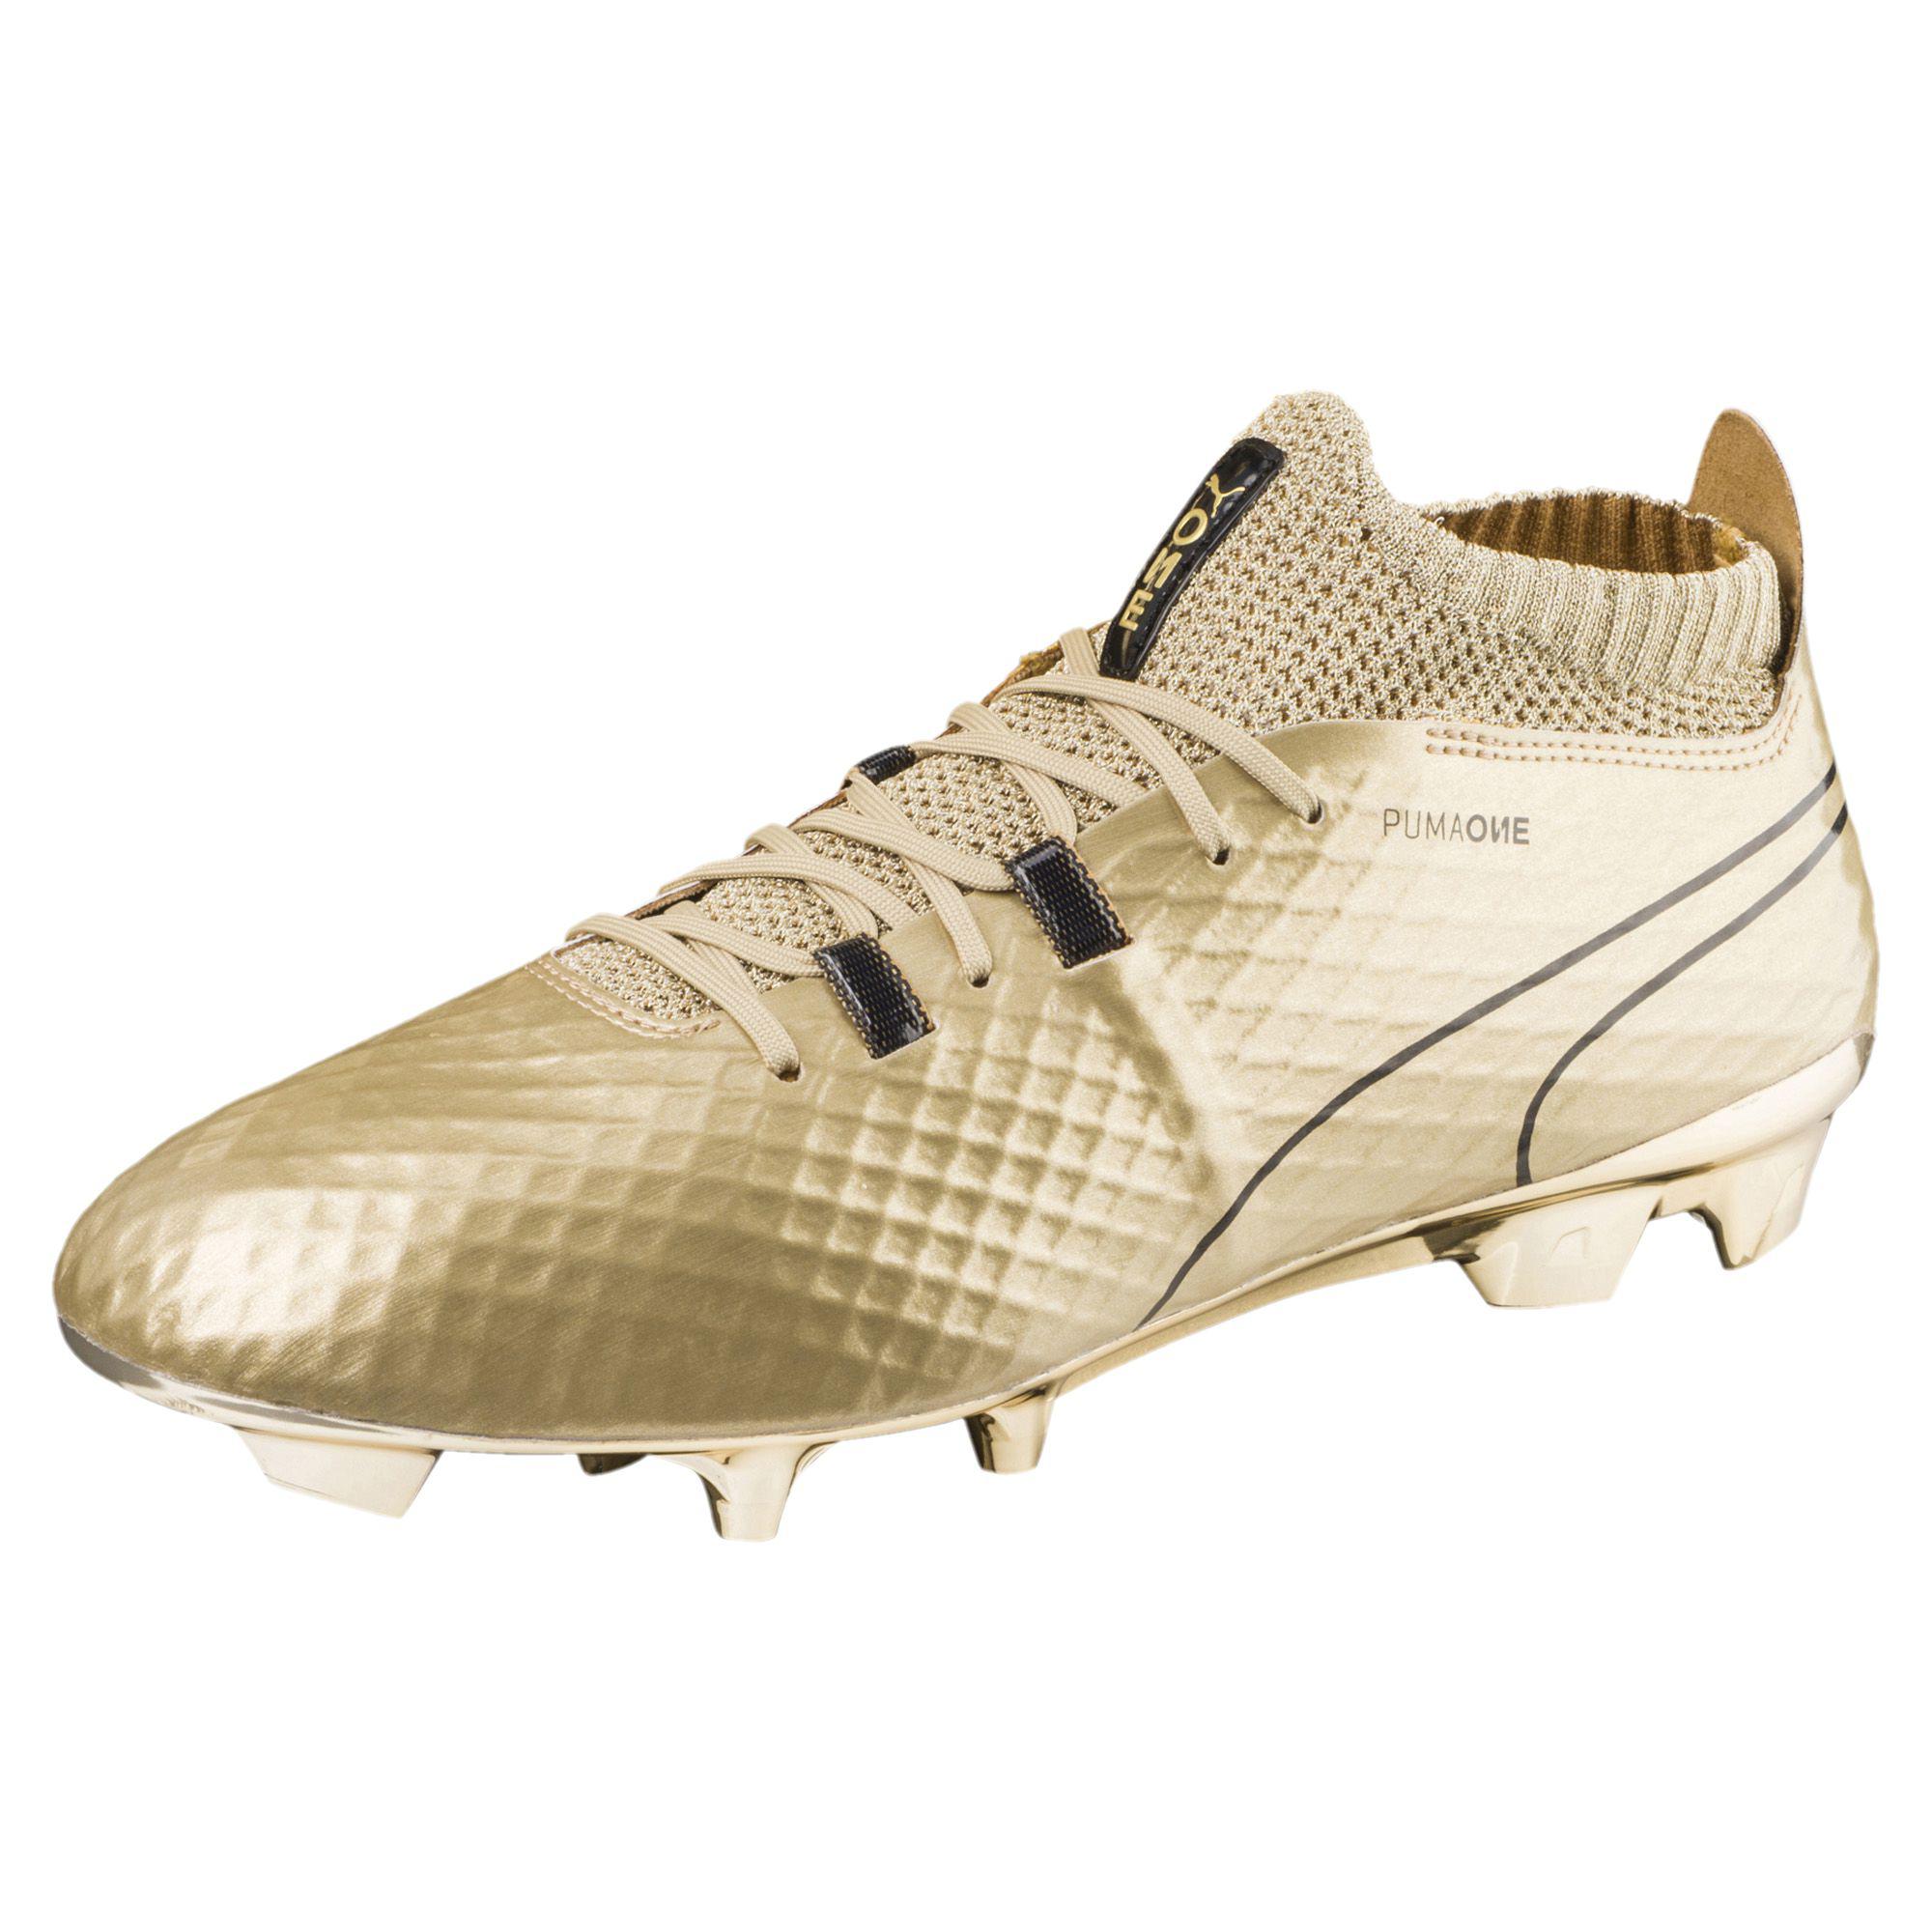 PUMA Synthetic One Gold Fg Men's Soccer Cleats in Gold-Gold-Black ...